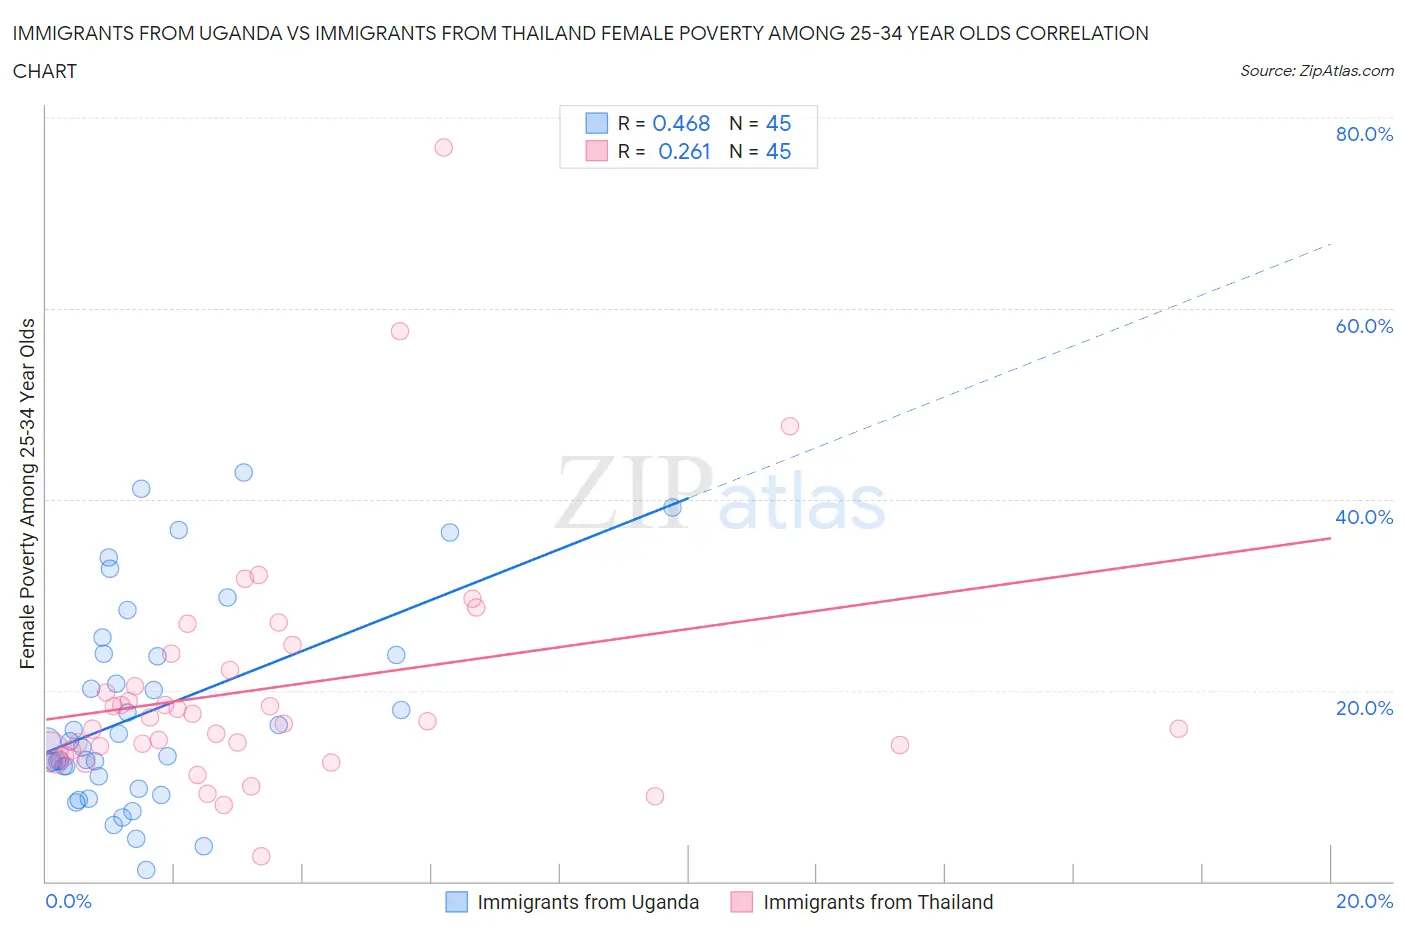 Immigrants from Uganda vs Immigrants from Thailand Female Poverty Among 25-34 Year Olds